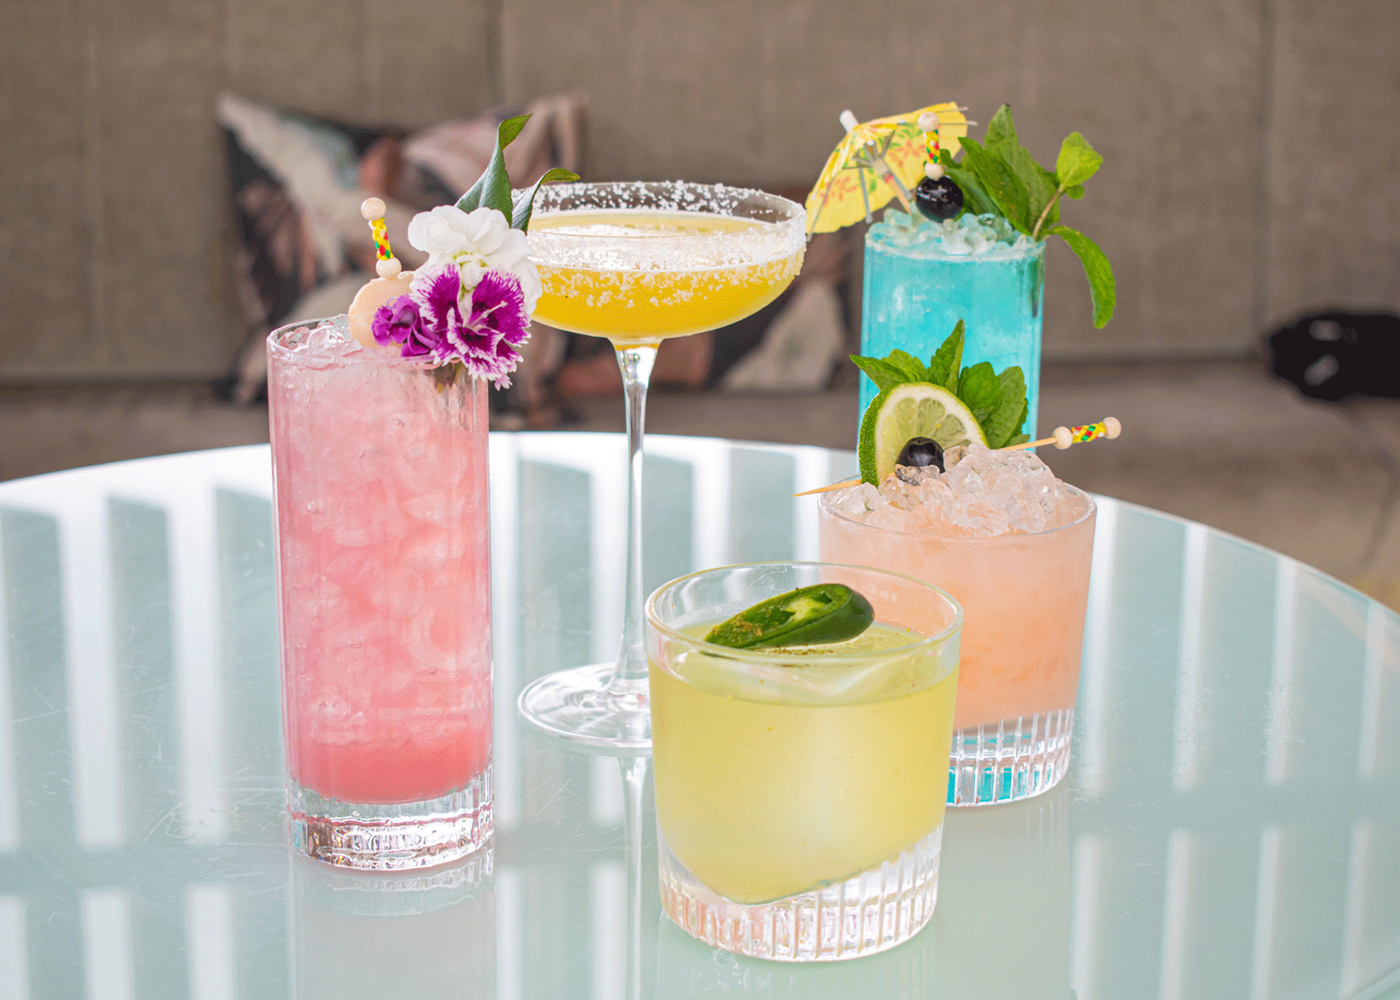 Five bright and colourful cocktails with garnishes on a glass table.